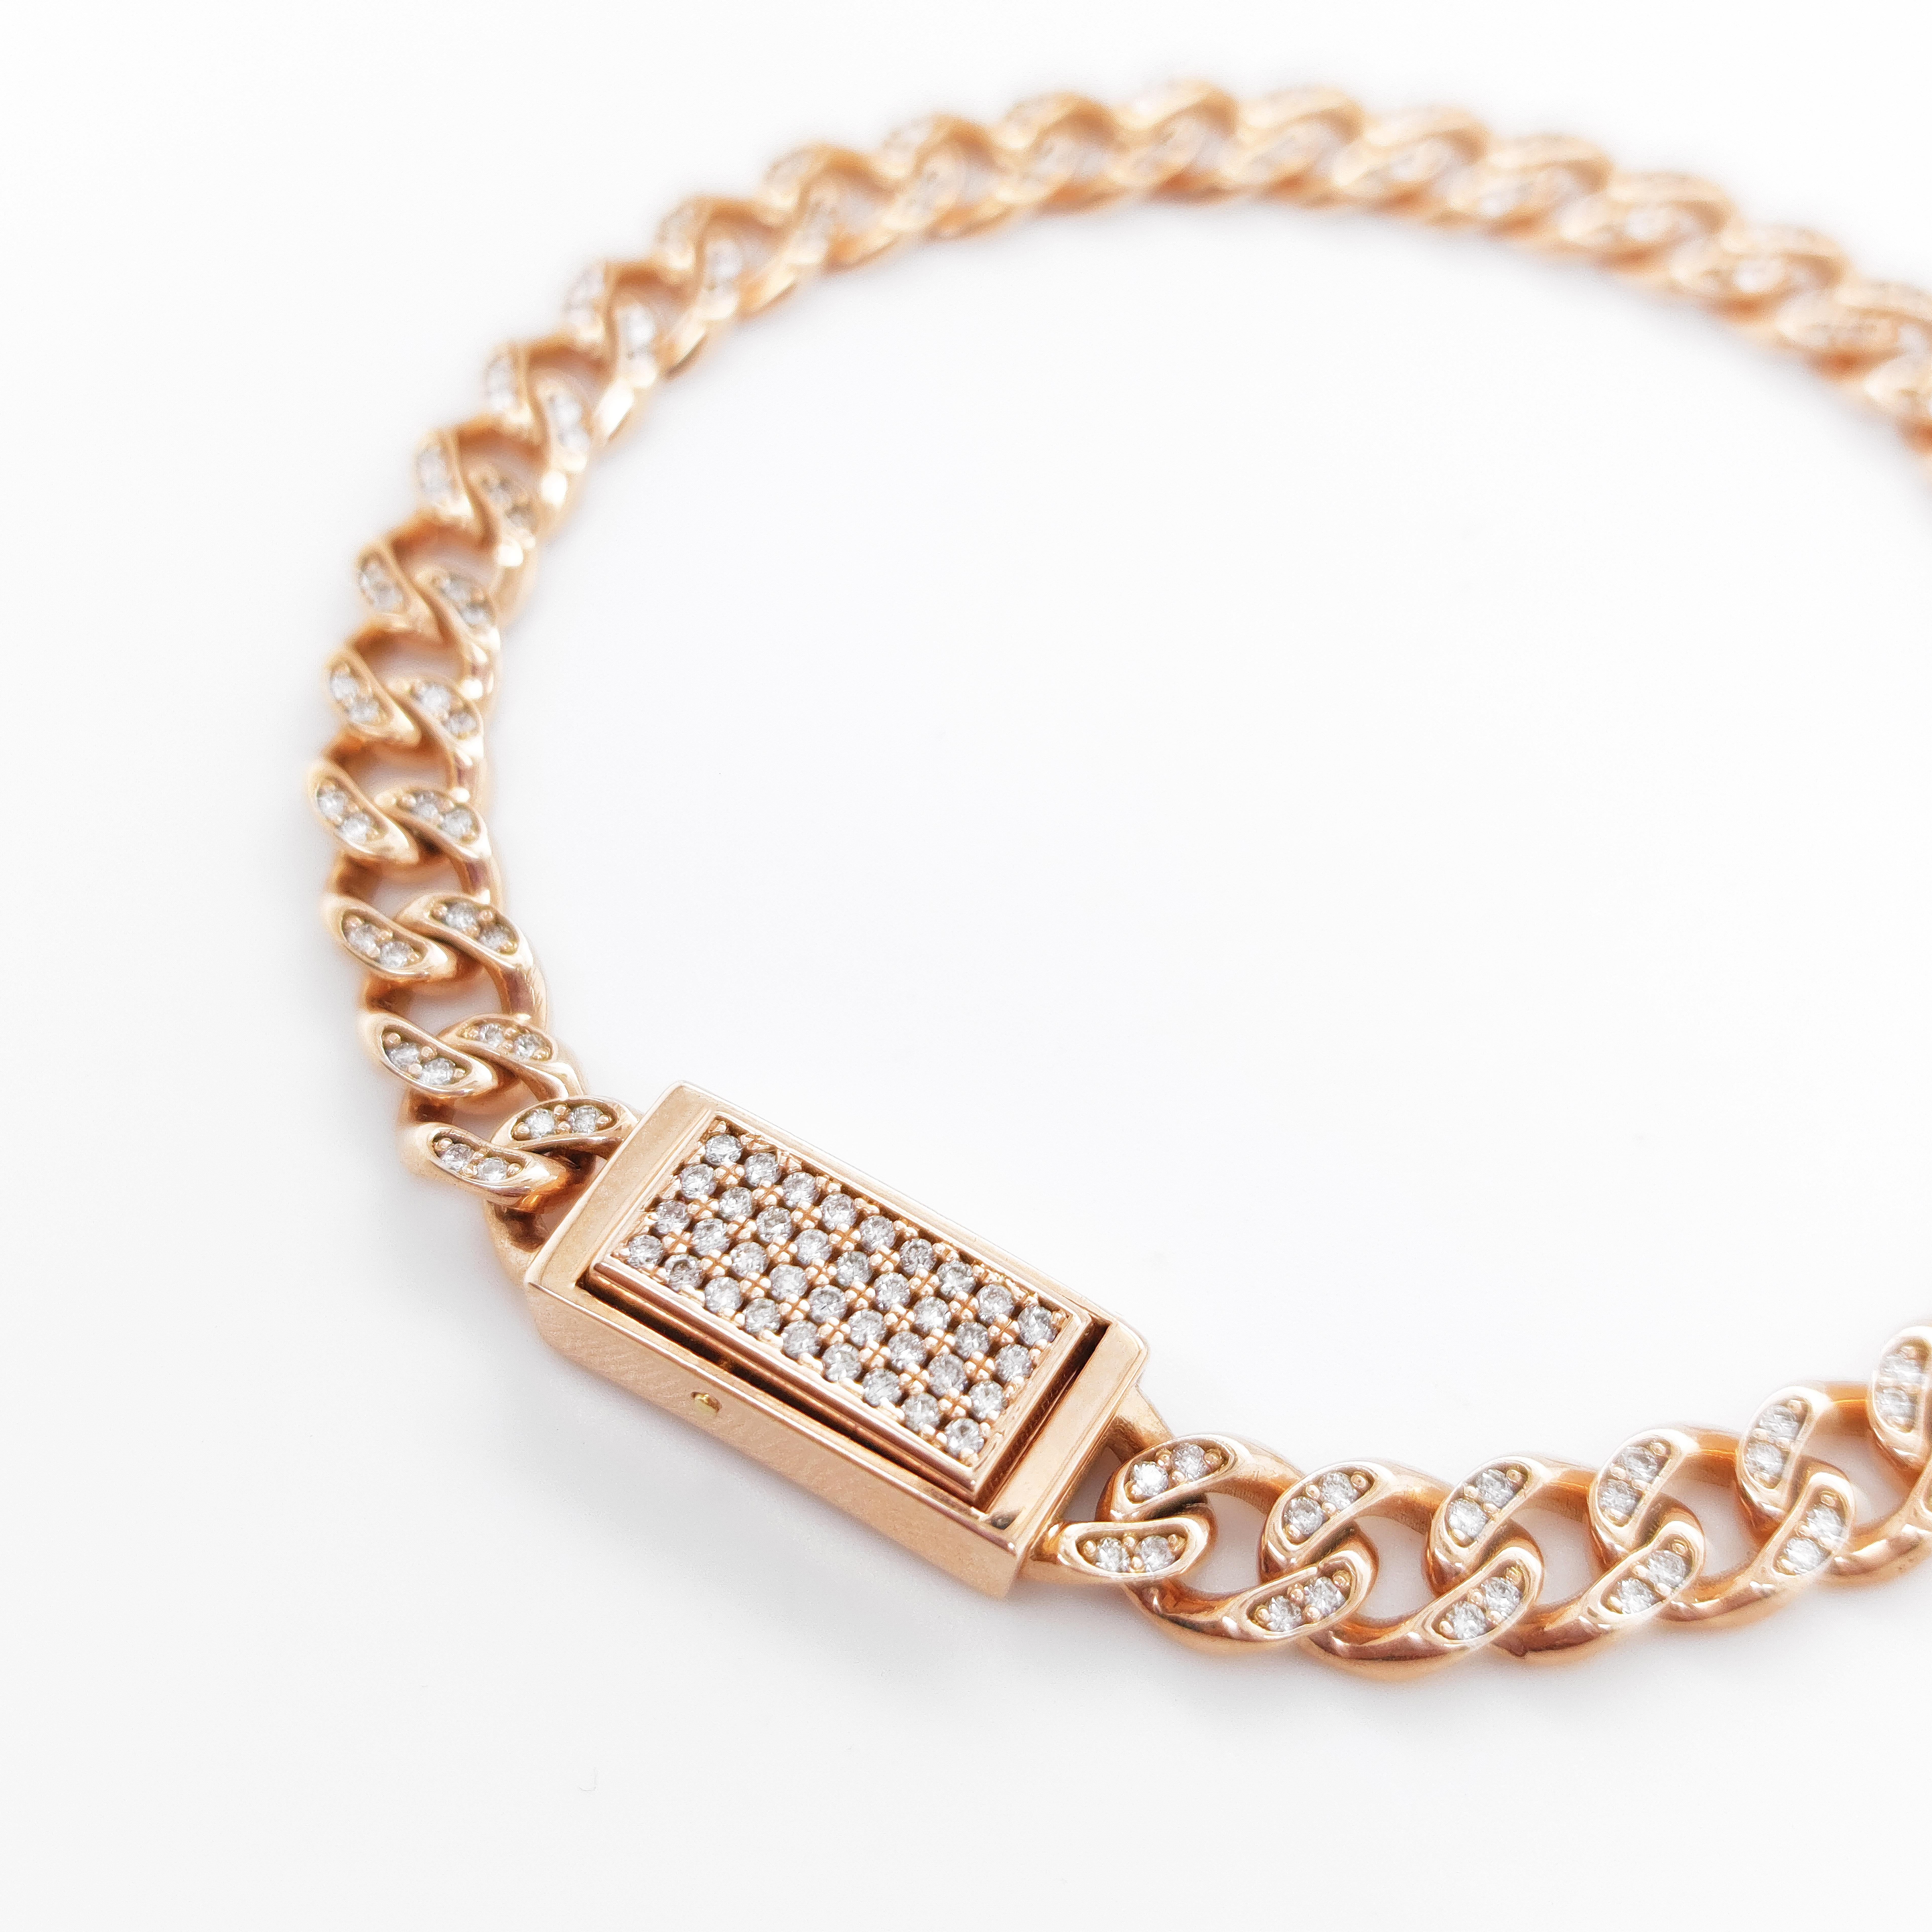 This bracelet is made from 18kt rose gold, giving it a warm and luxurious appearance. It features a Groumette style chain that adds a touch of modern sophistication. The bracelet is further enhanced with the addition of sparkling diamonds that are